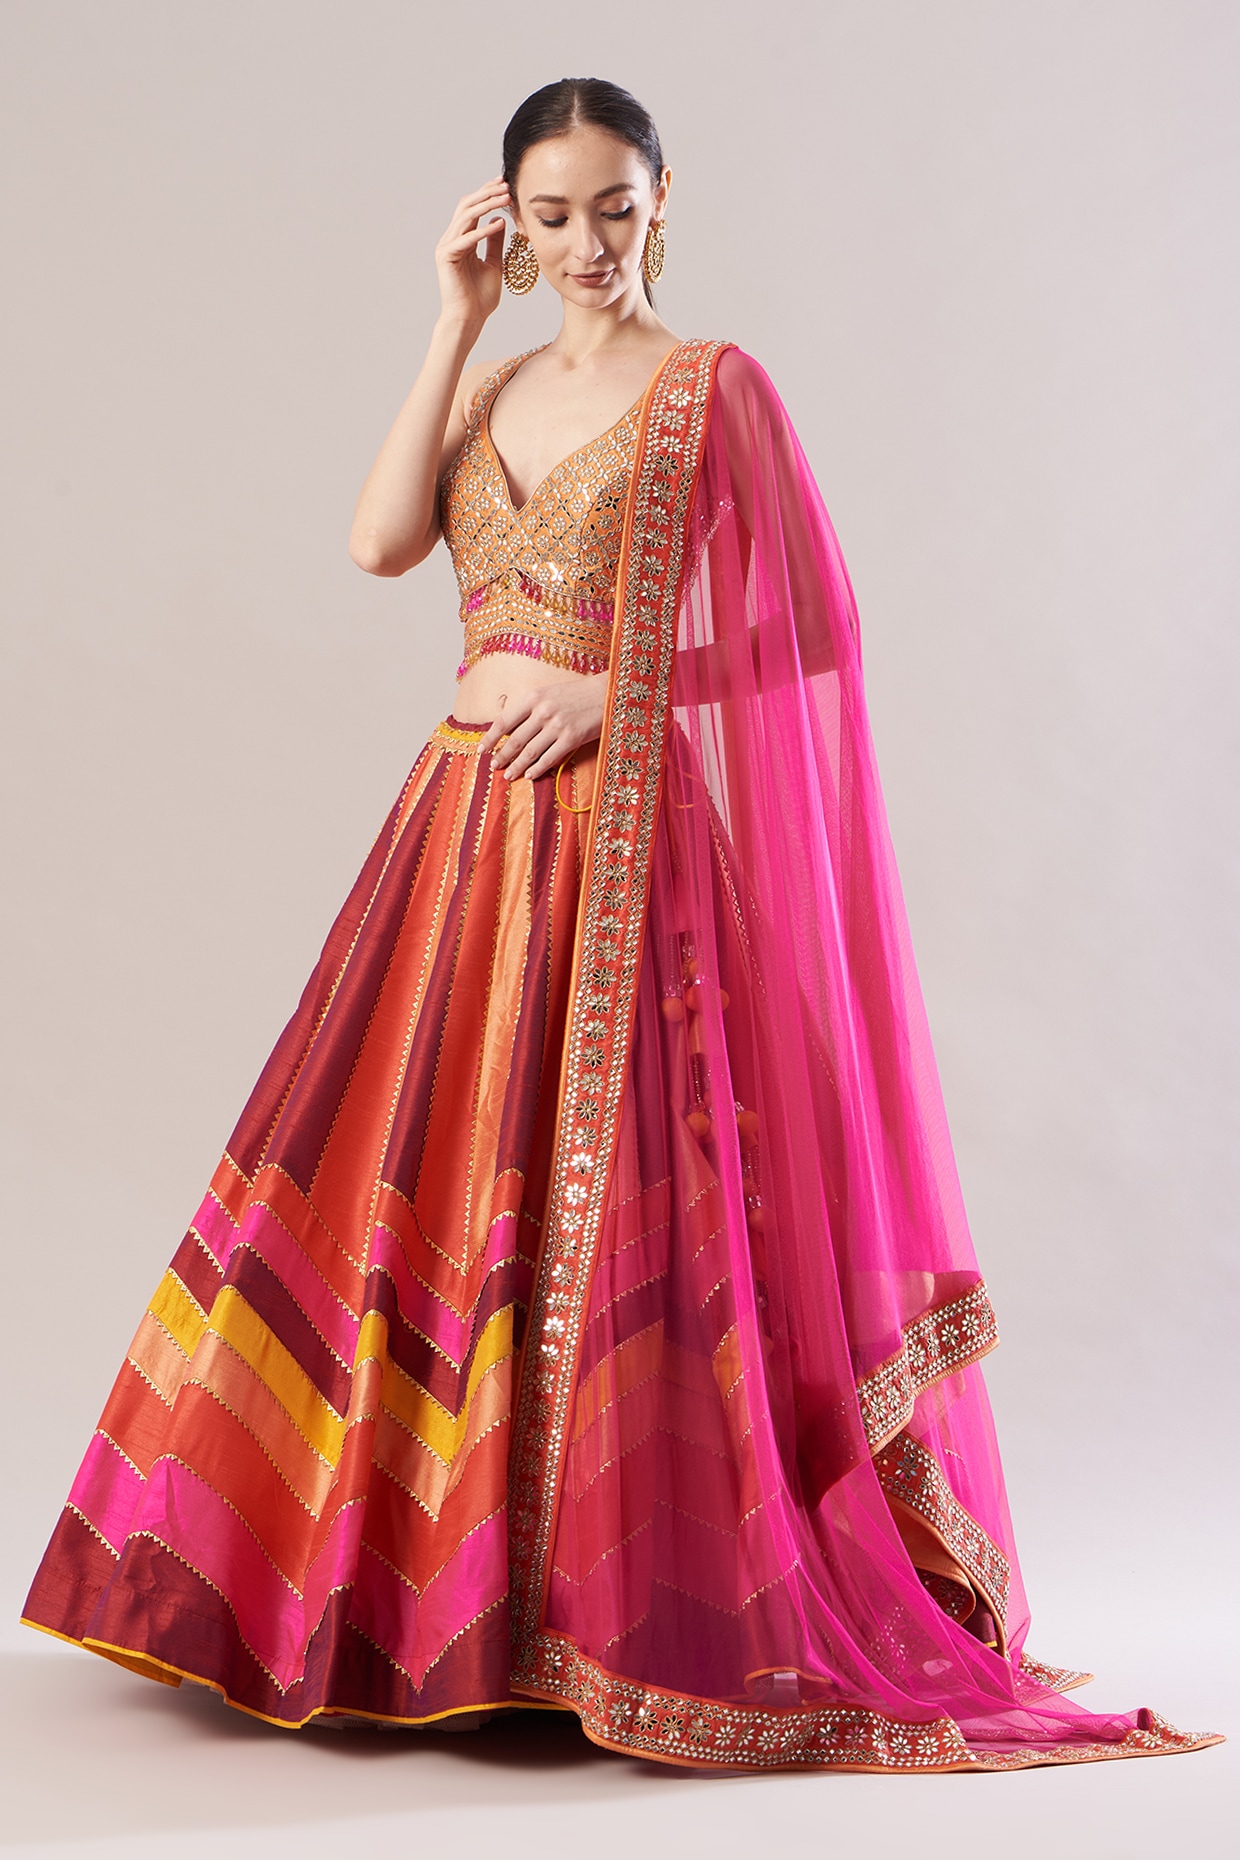 Buy FUSIONIC Alluring Multi Colored Heavy Embroidered Lehenga Choli For  Women at Amazon.in